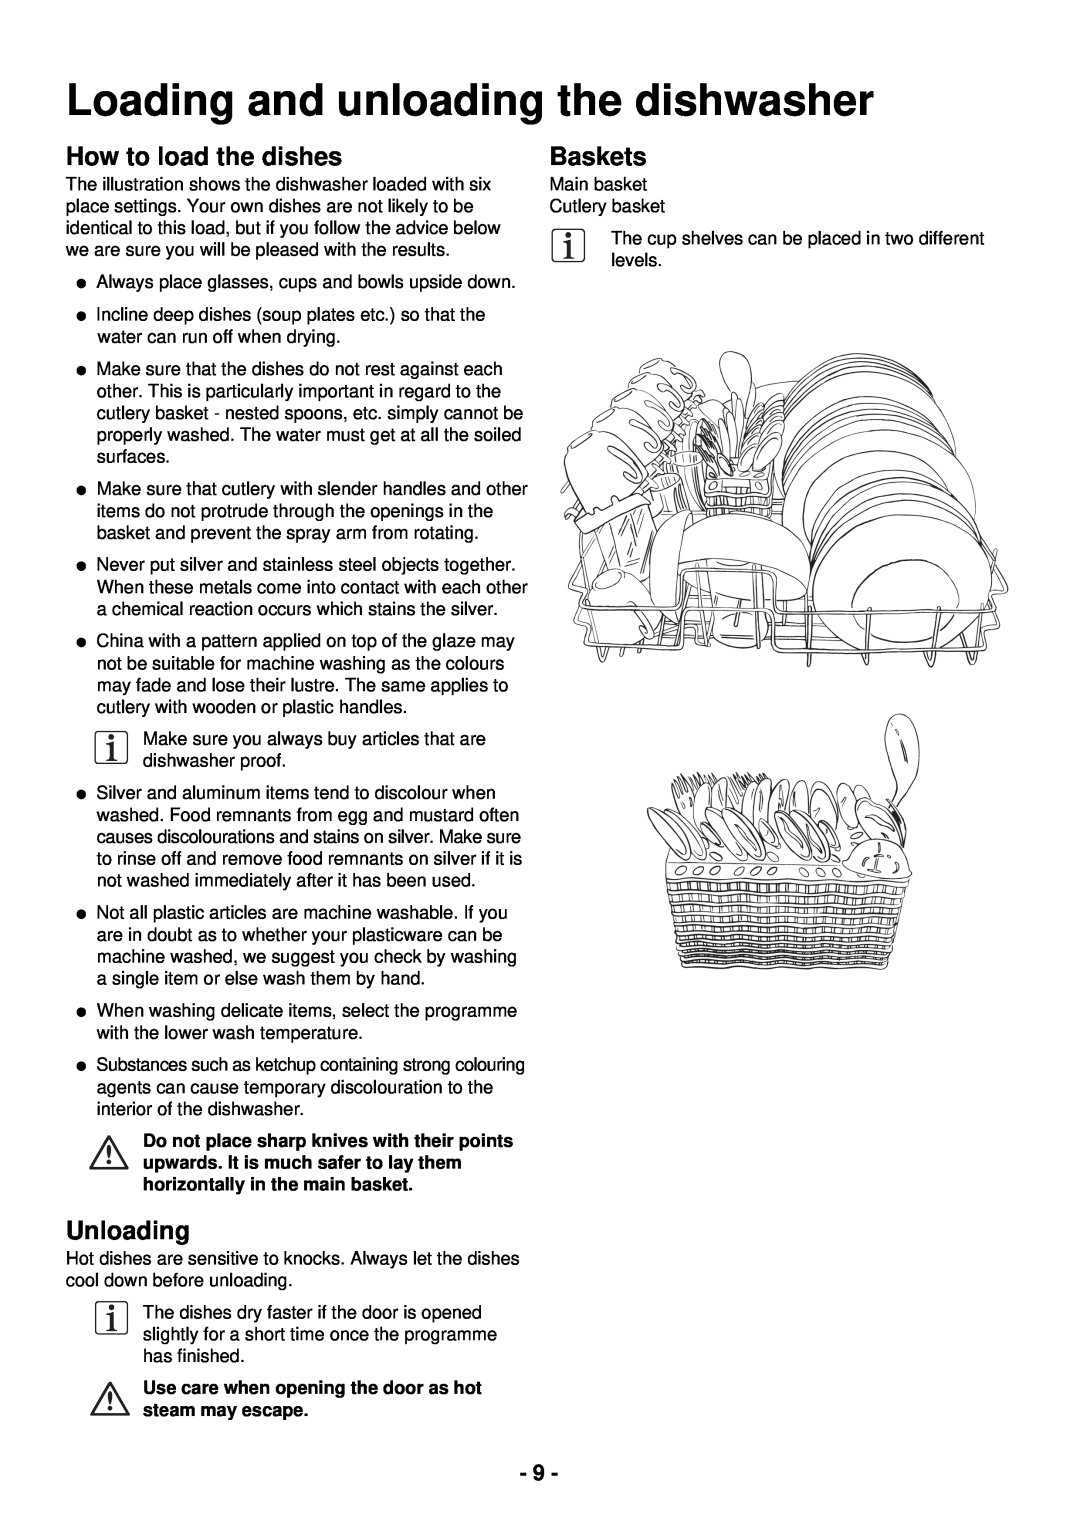 Zanussi ZSF 2440 manual Loading and unloading the dishwasher, How to load the dishes, Unloading, Baskets 